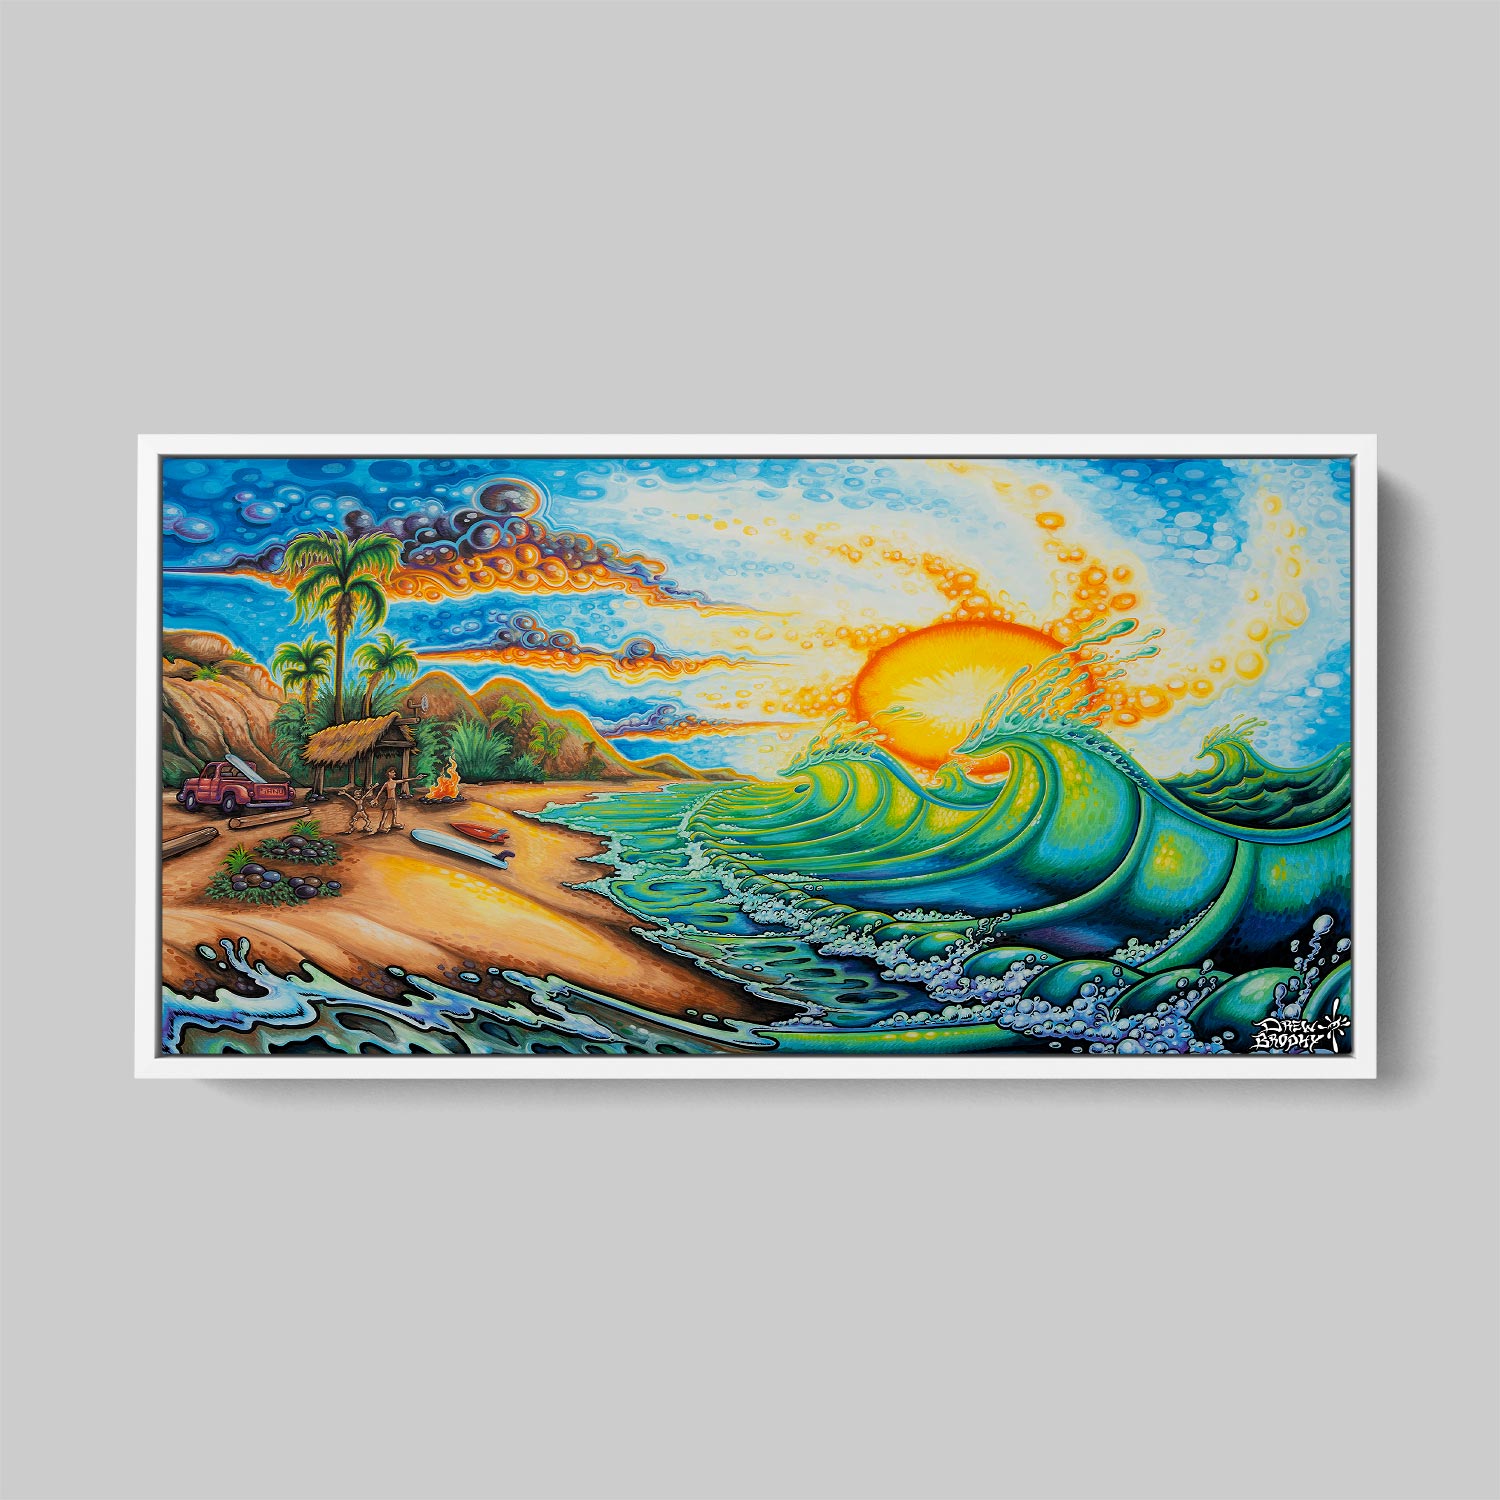 Sano Daze Signed & Numbered, Limited Edition Wall Surf Art Prints